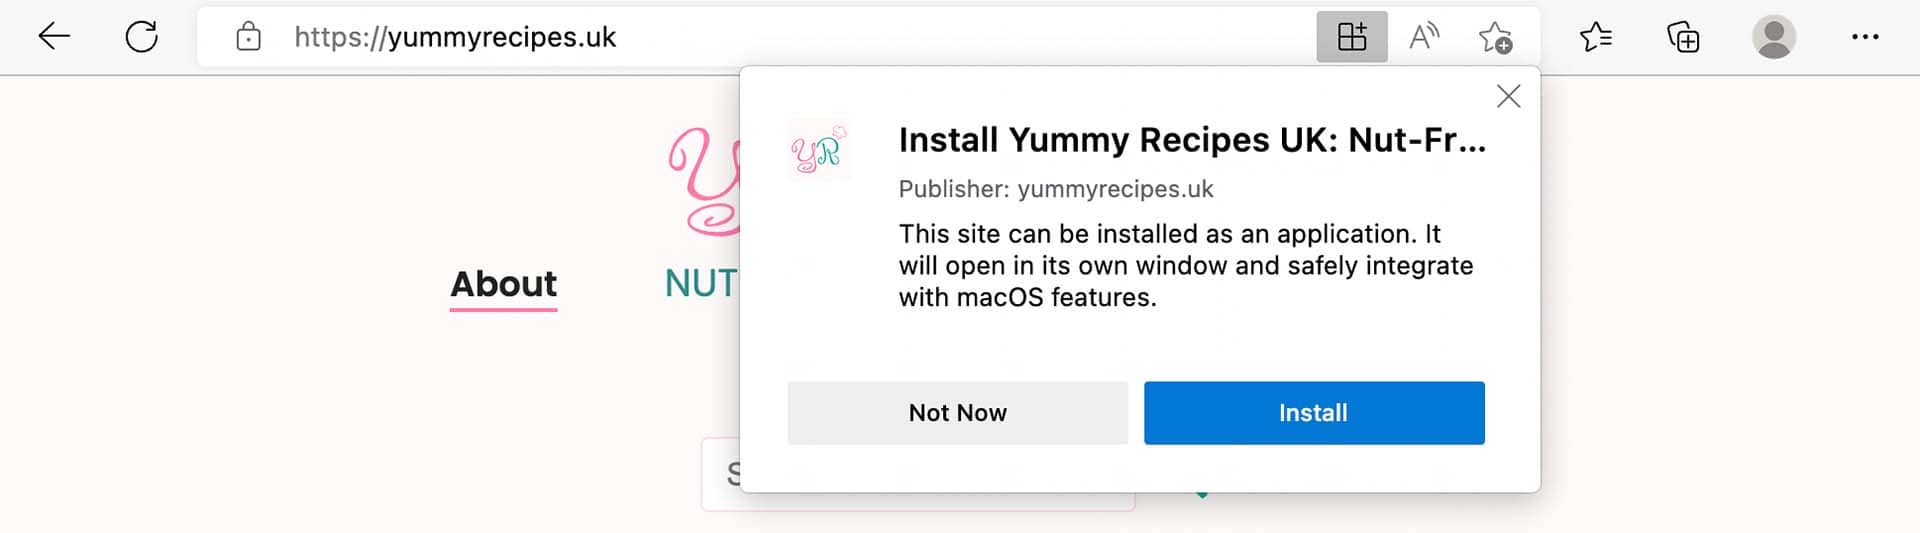 PWA of Yummy Recipes in Microsoft Edge displaying information when trying to install the app